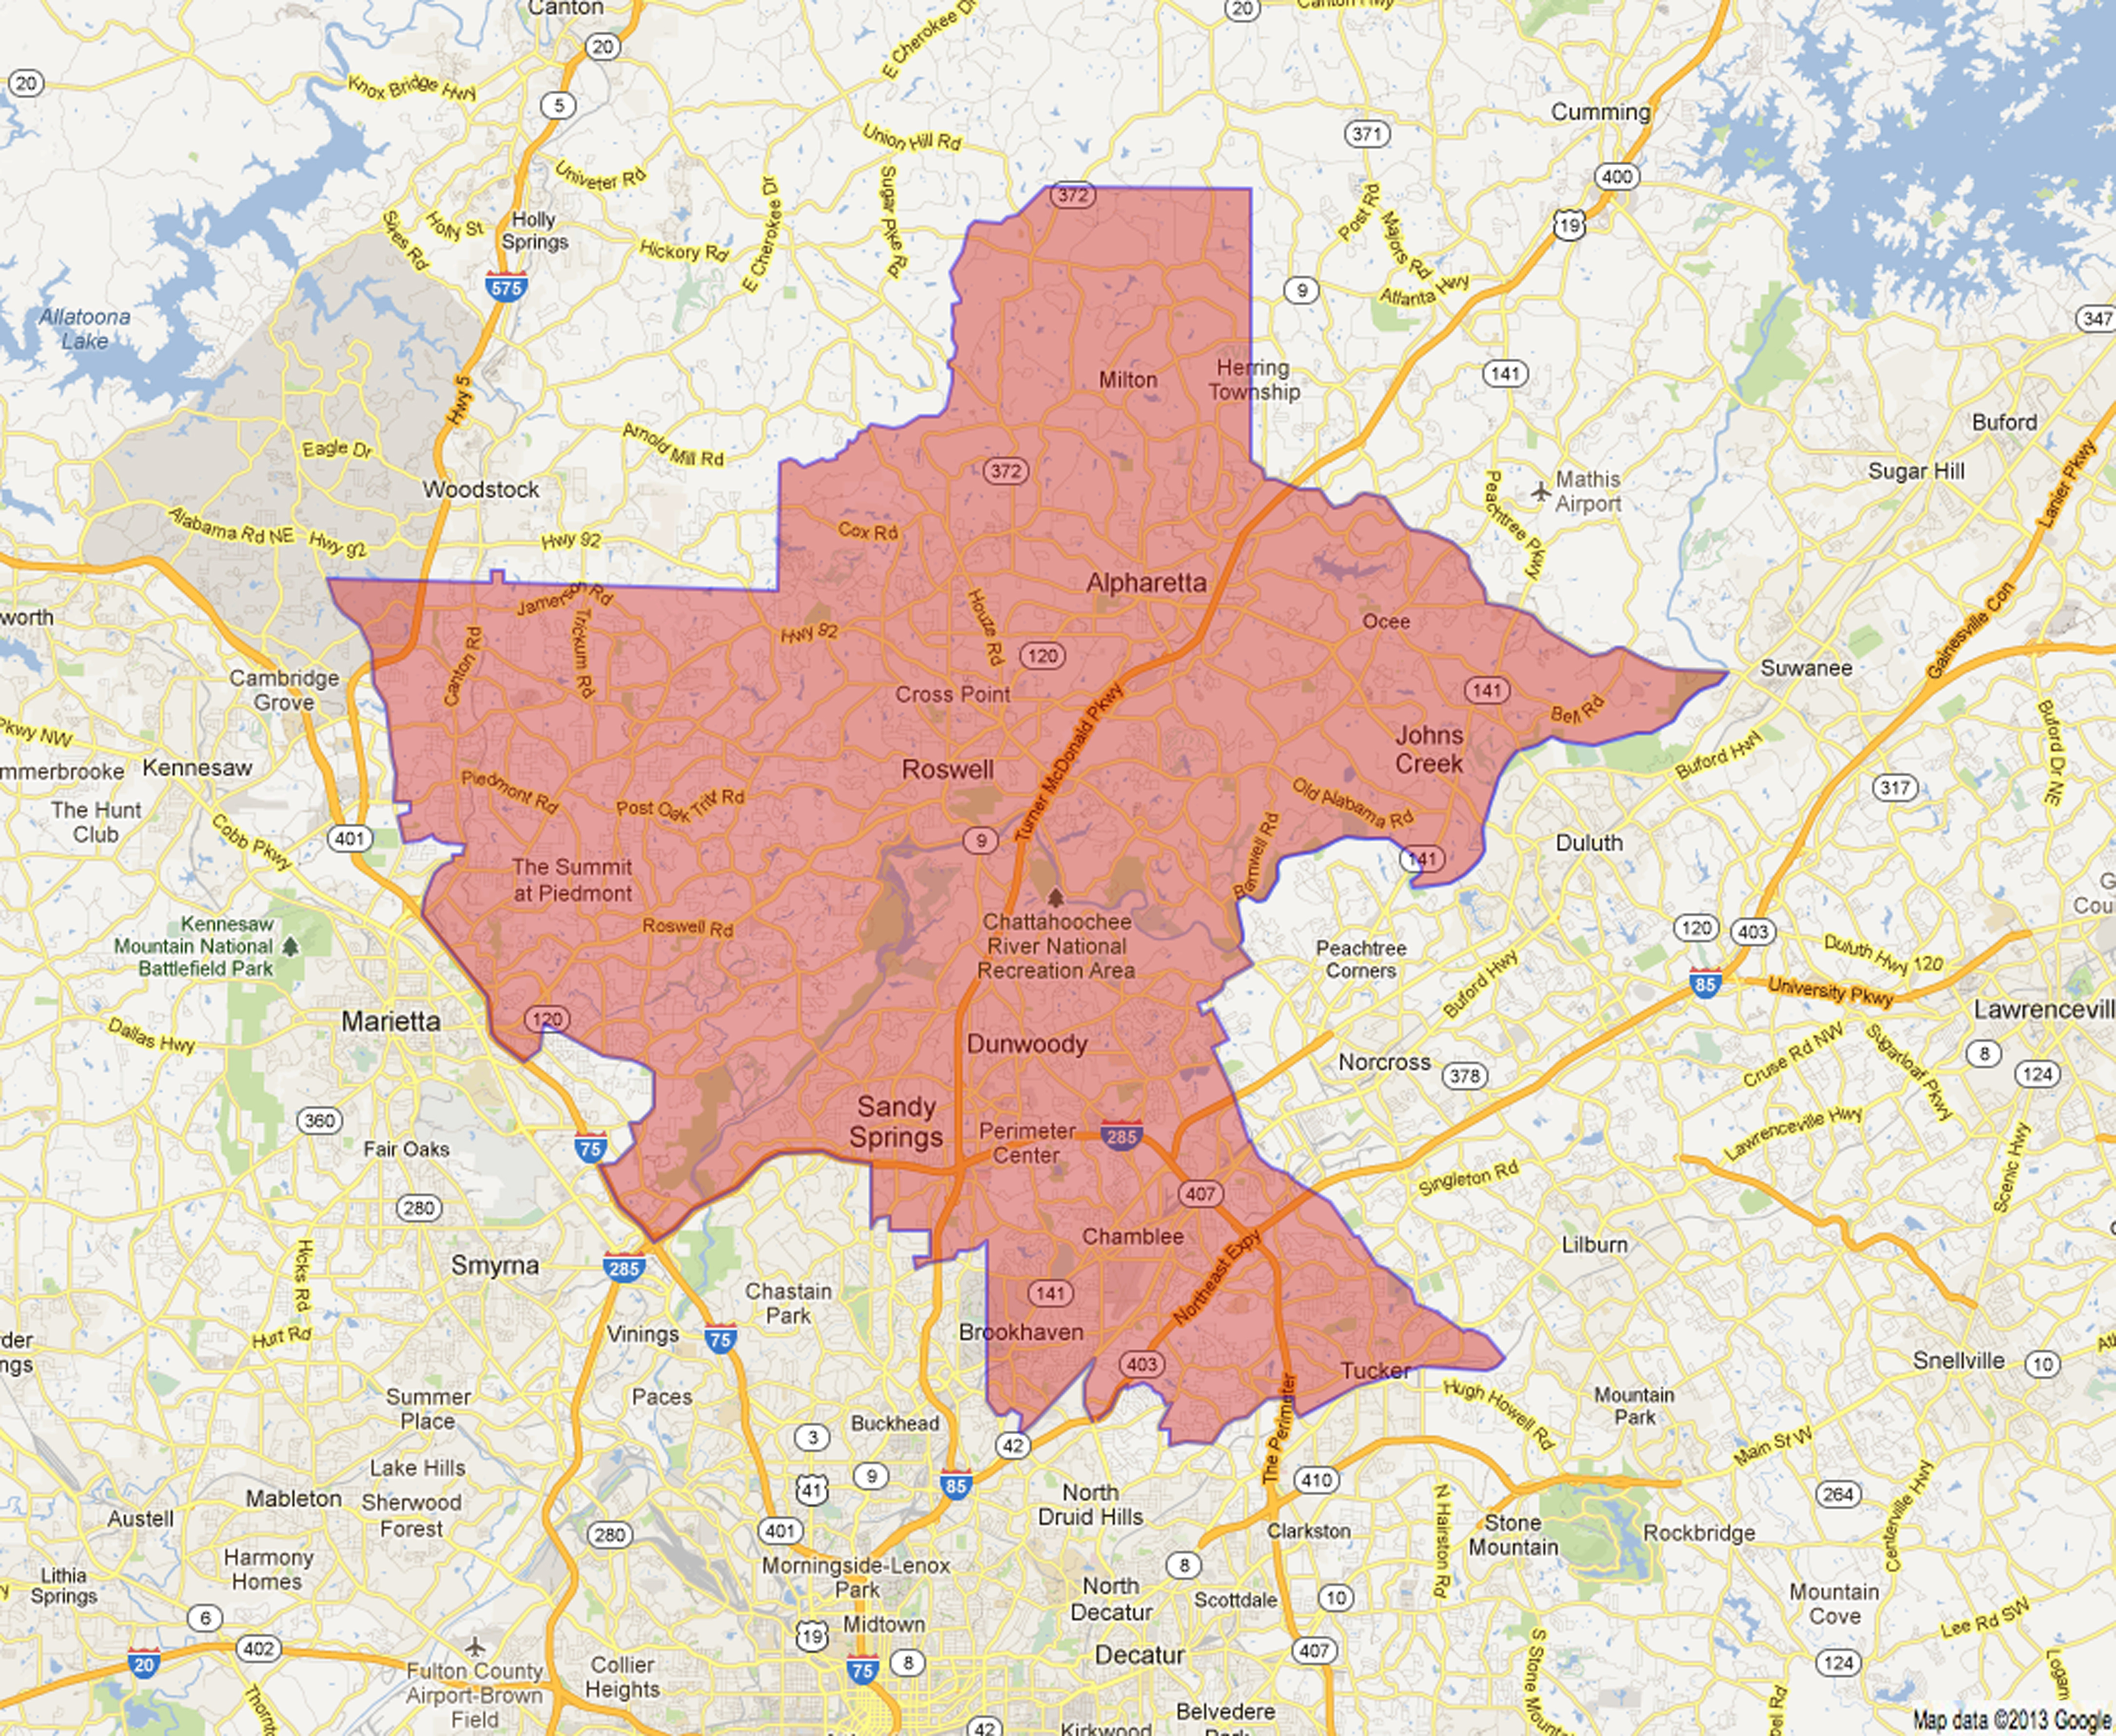 http://tomprice.house.gov/sites/tomprice.house.gov/files/Map%20of%20the%20Sixth%20District%20of%20GA_0.jpg